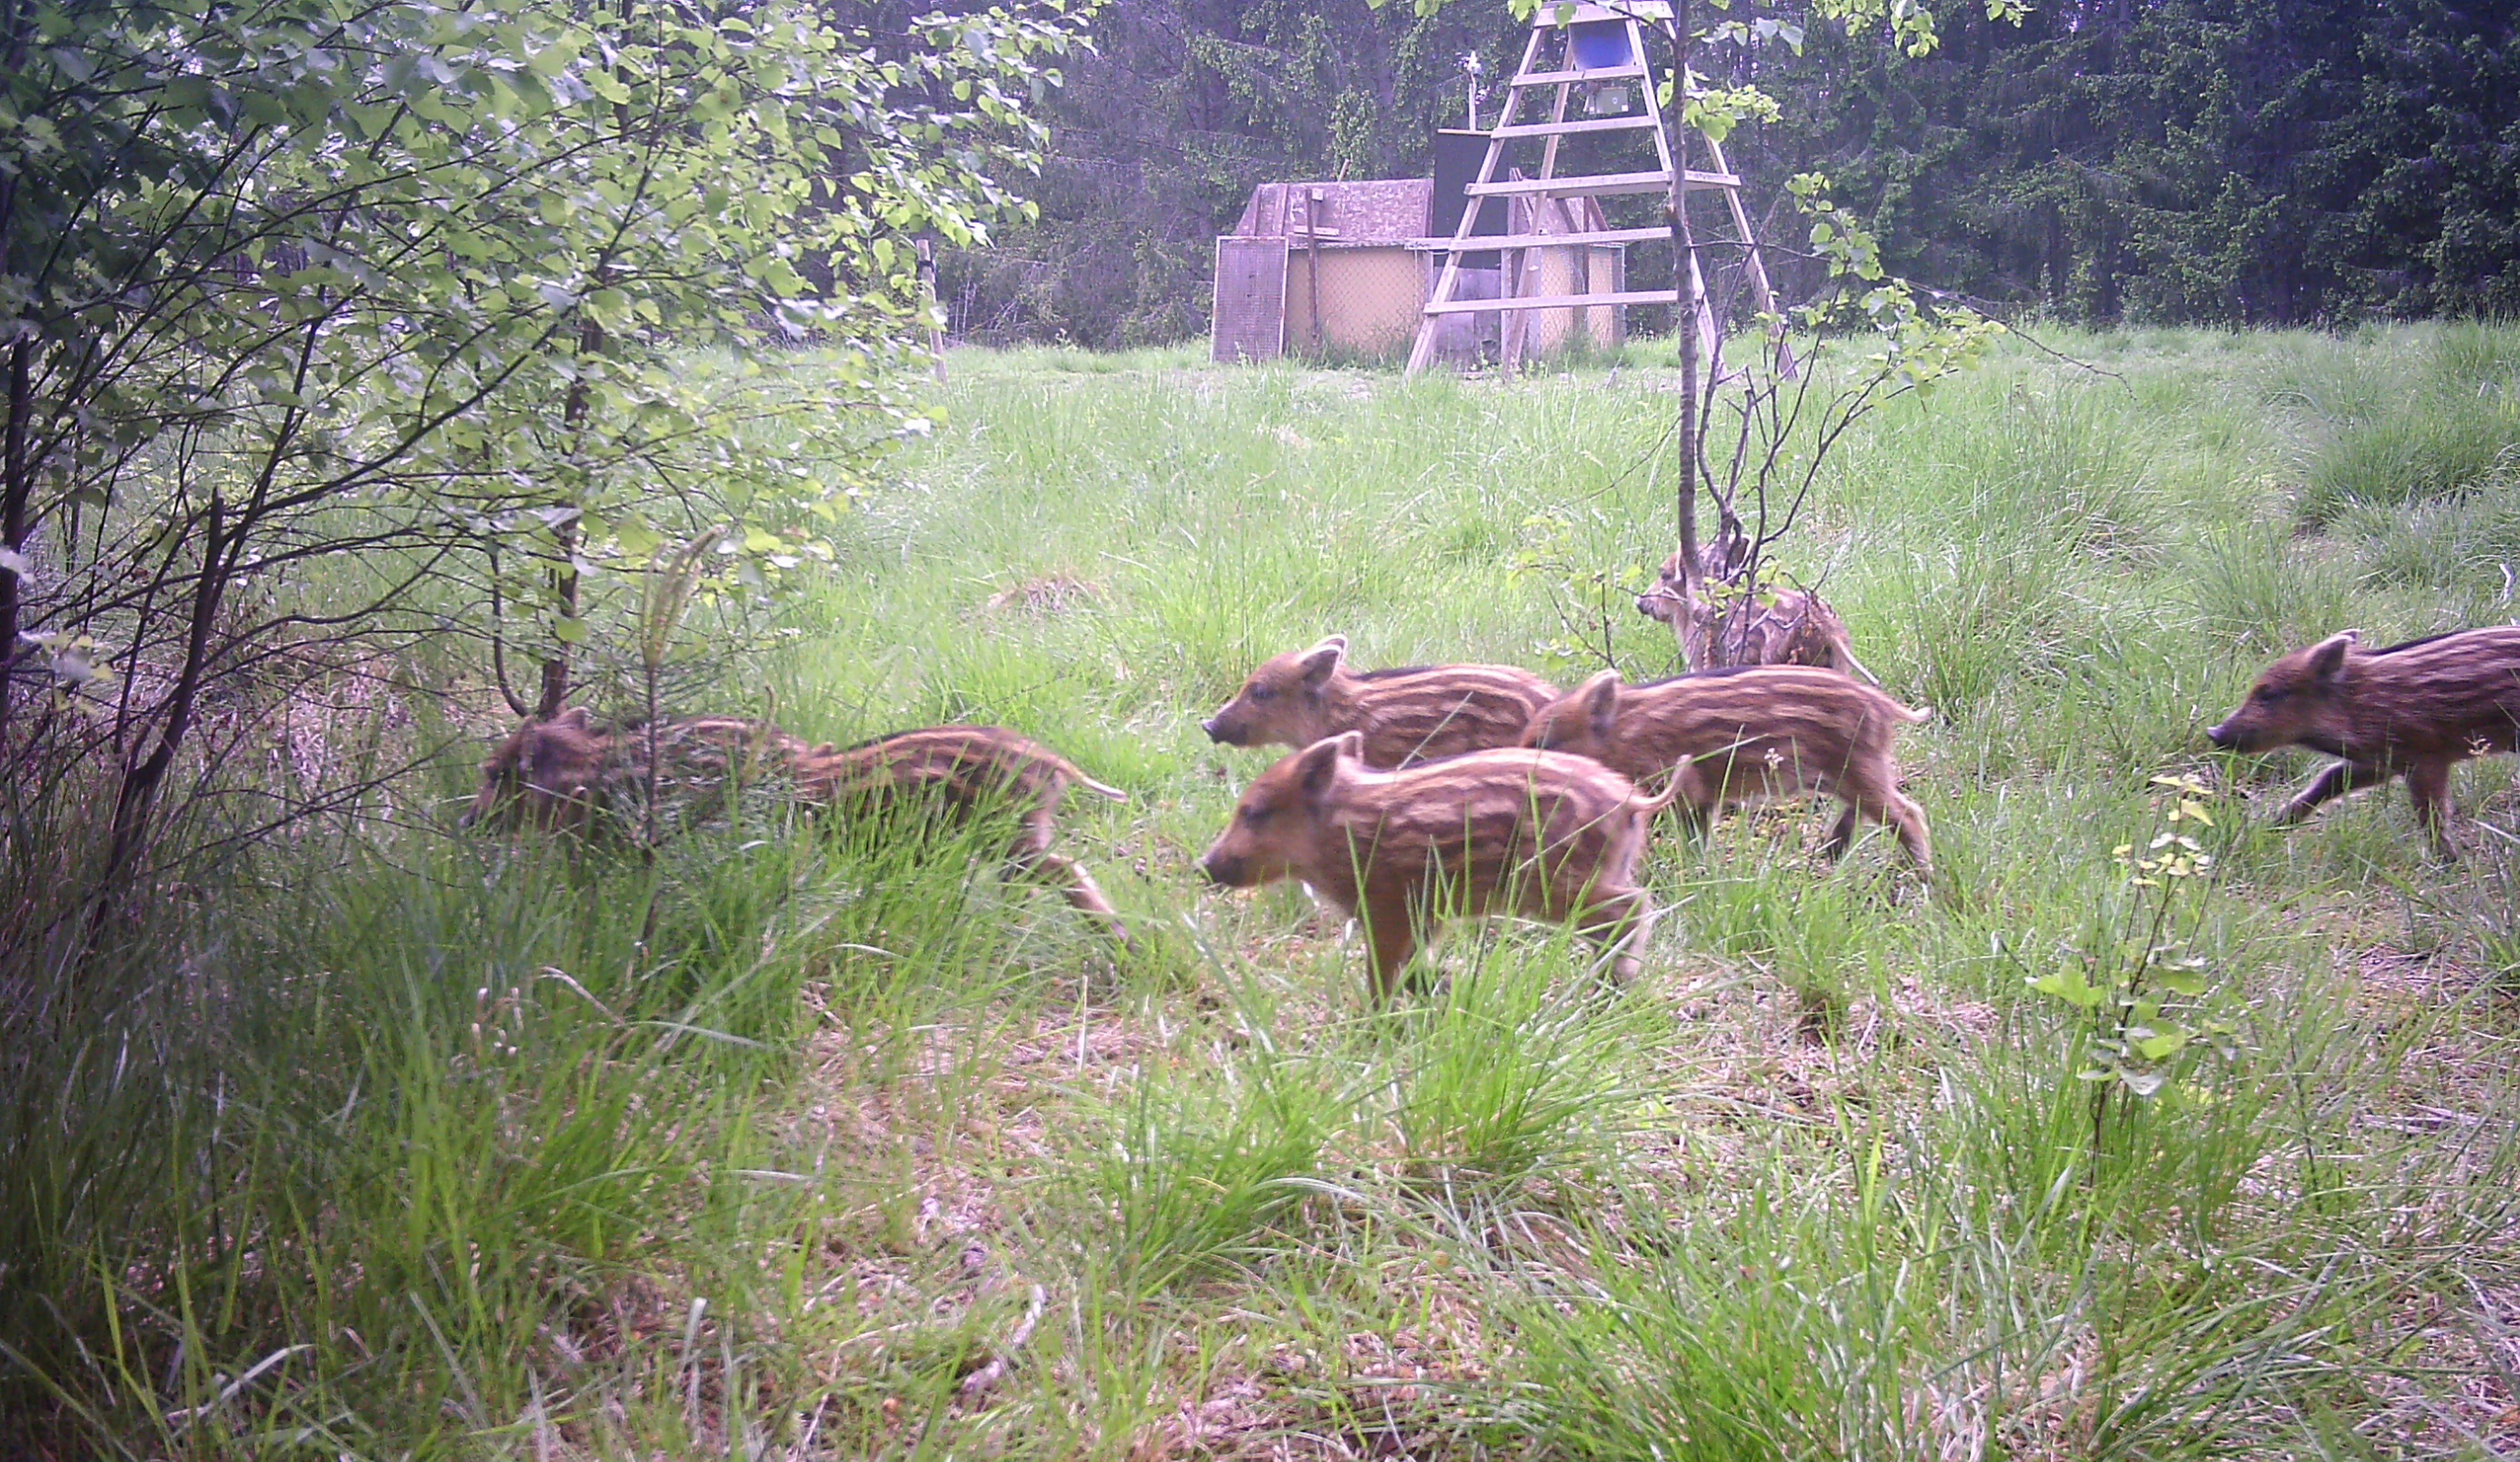 Wild boar piglets caught by a camera trap. A feeding station and a trapping coral are show in the back.